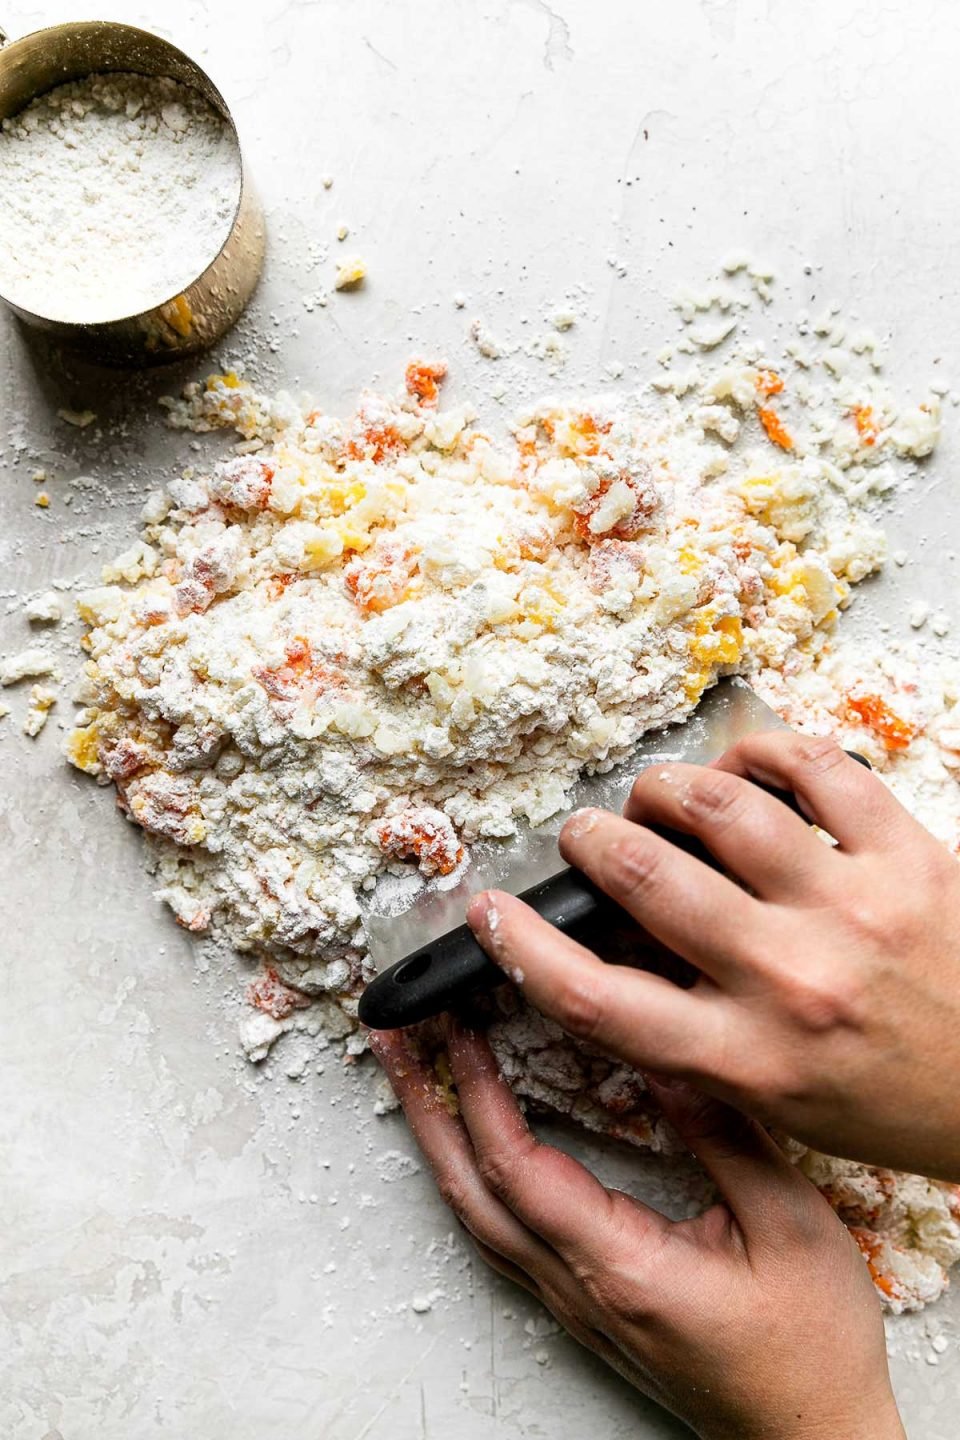 A woman's hands hold a bench scraper and use it to combine the components of the homemade sweet potato gnocchi dough. The bench scraper helps to cut the flour into the potato mixture. The dough forms on a creamy white plaster textured surface and a gold measuring cup filled with extra pastry flour rests alongside the mixture.